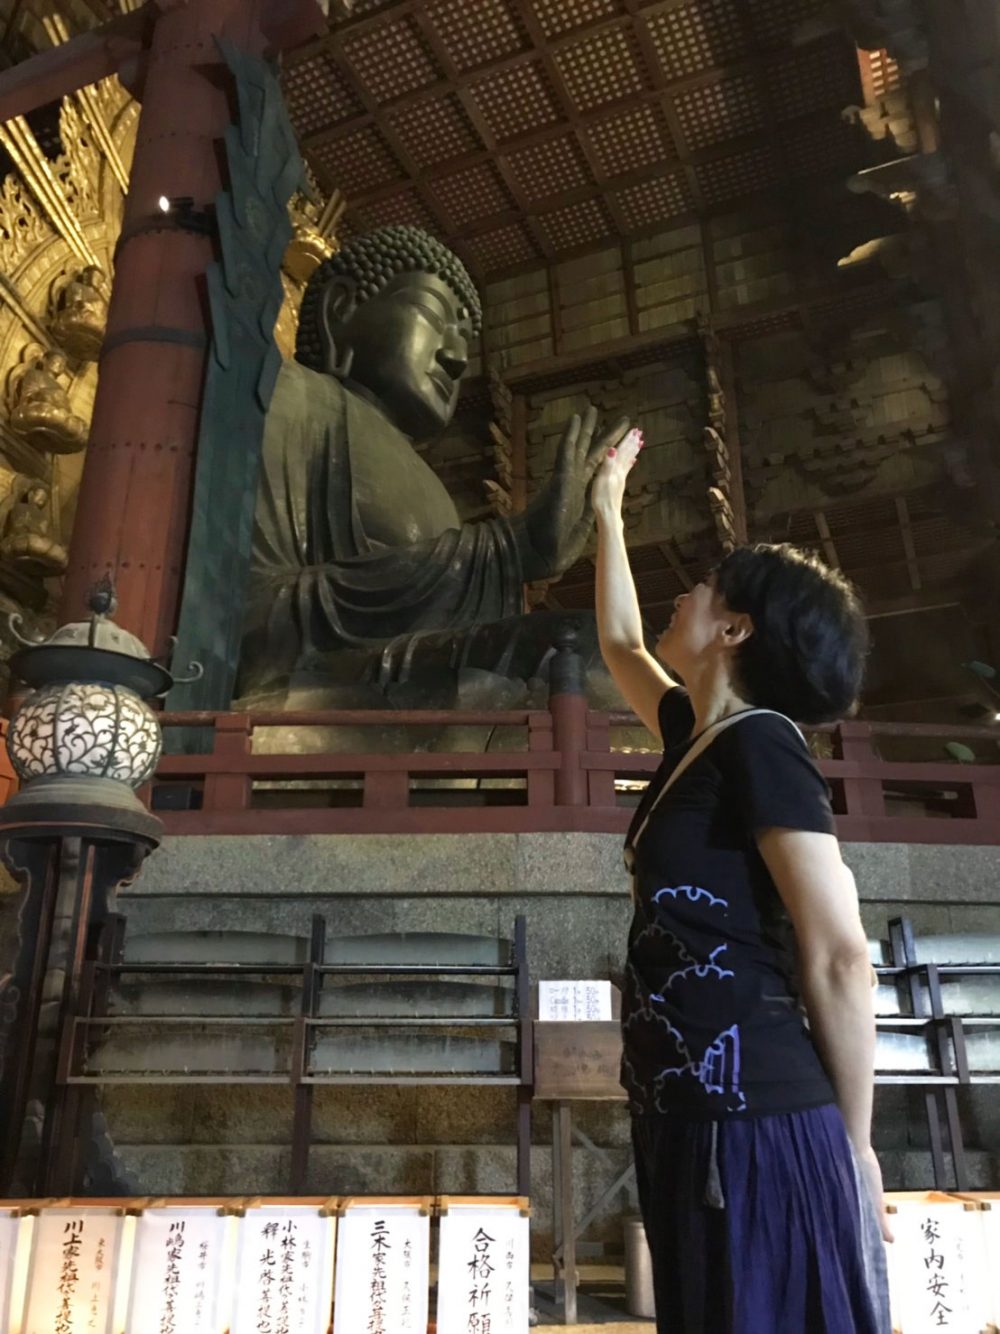 Child visiting Todaiji Temple, one of Japan's most important Buddhist temples